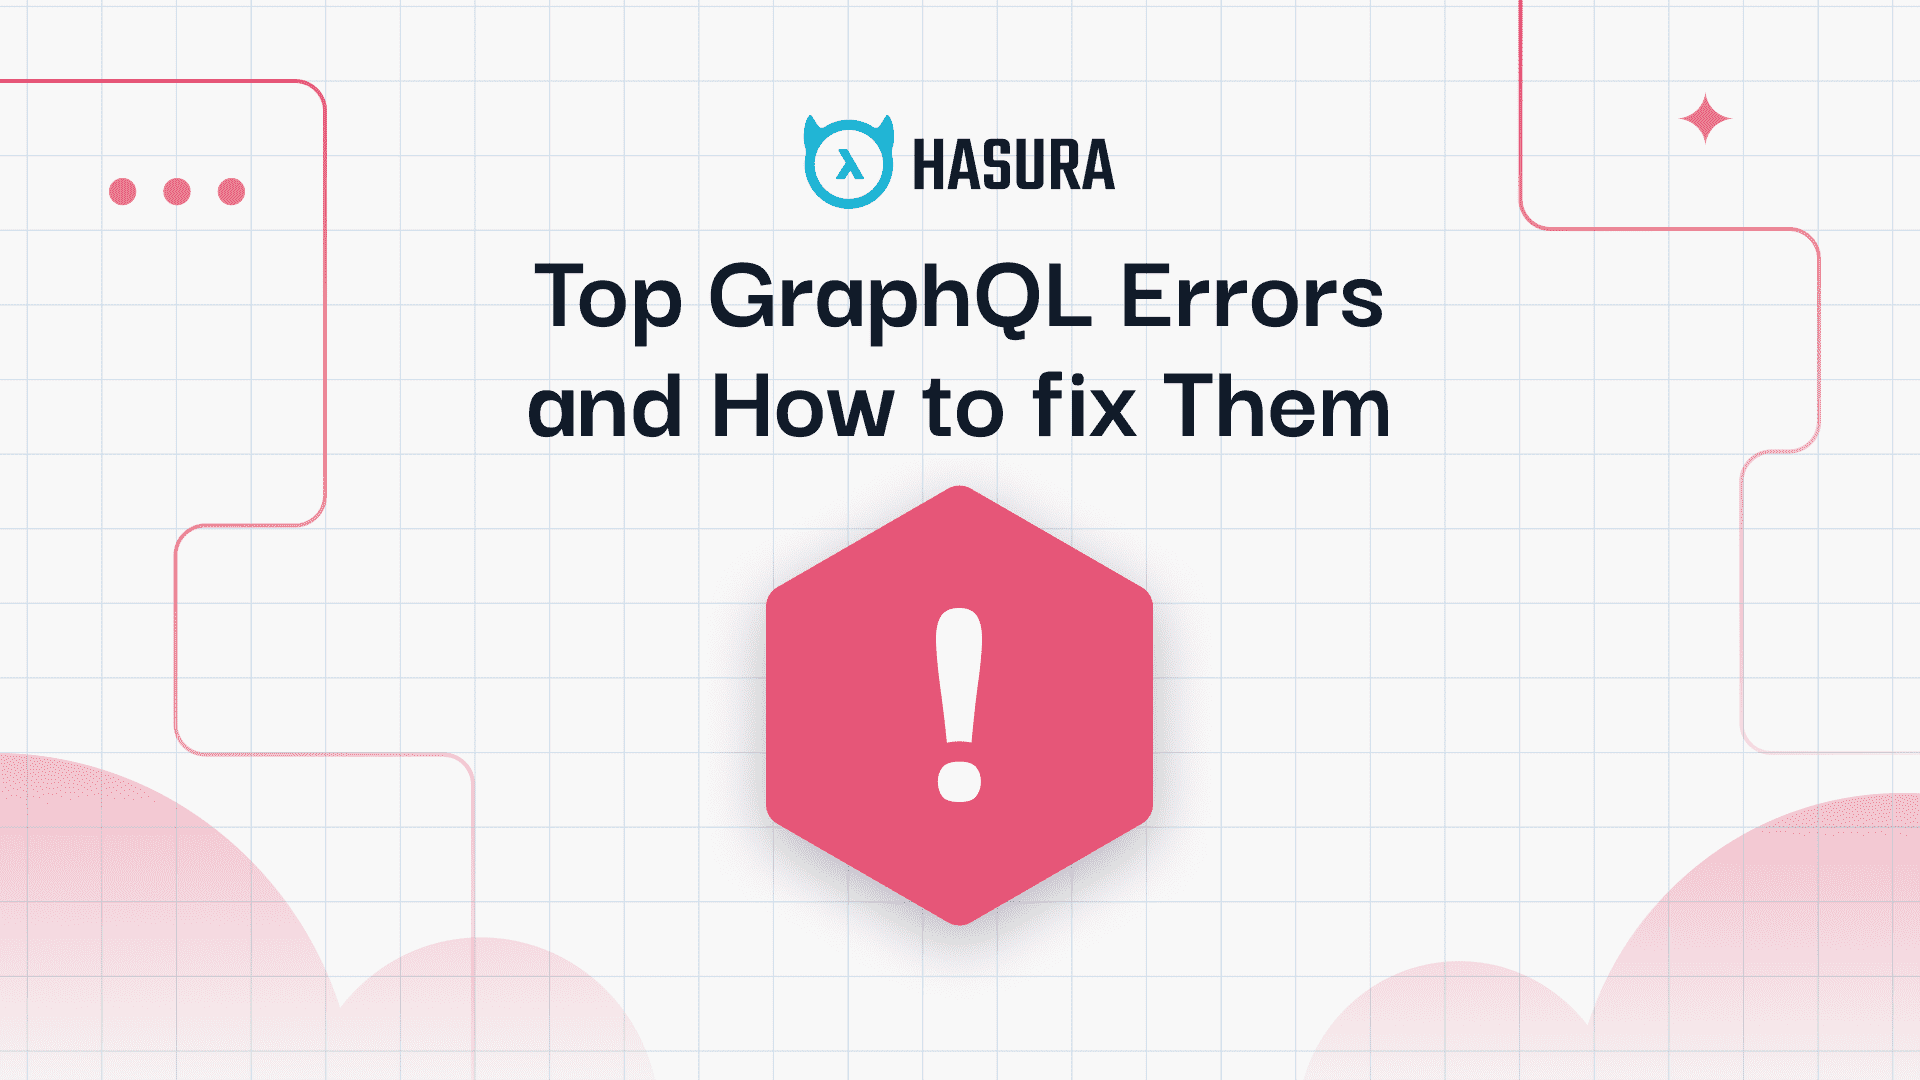 Top GraphQL Errors and How to Fix them